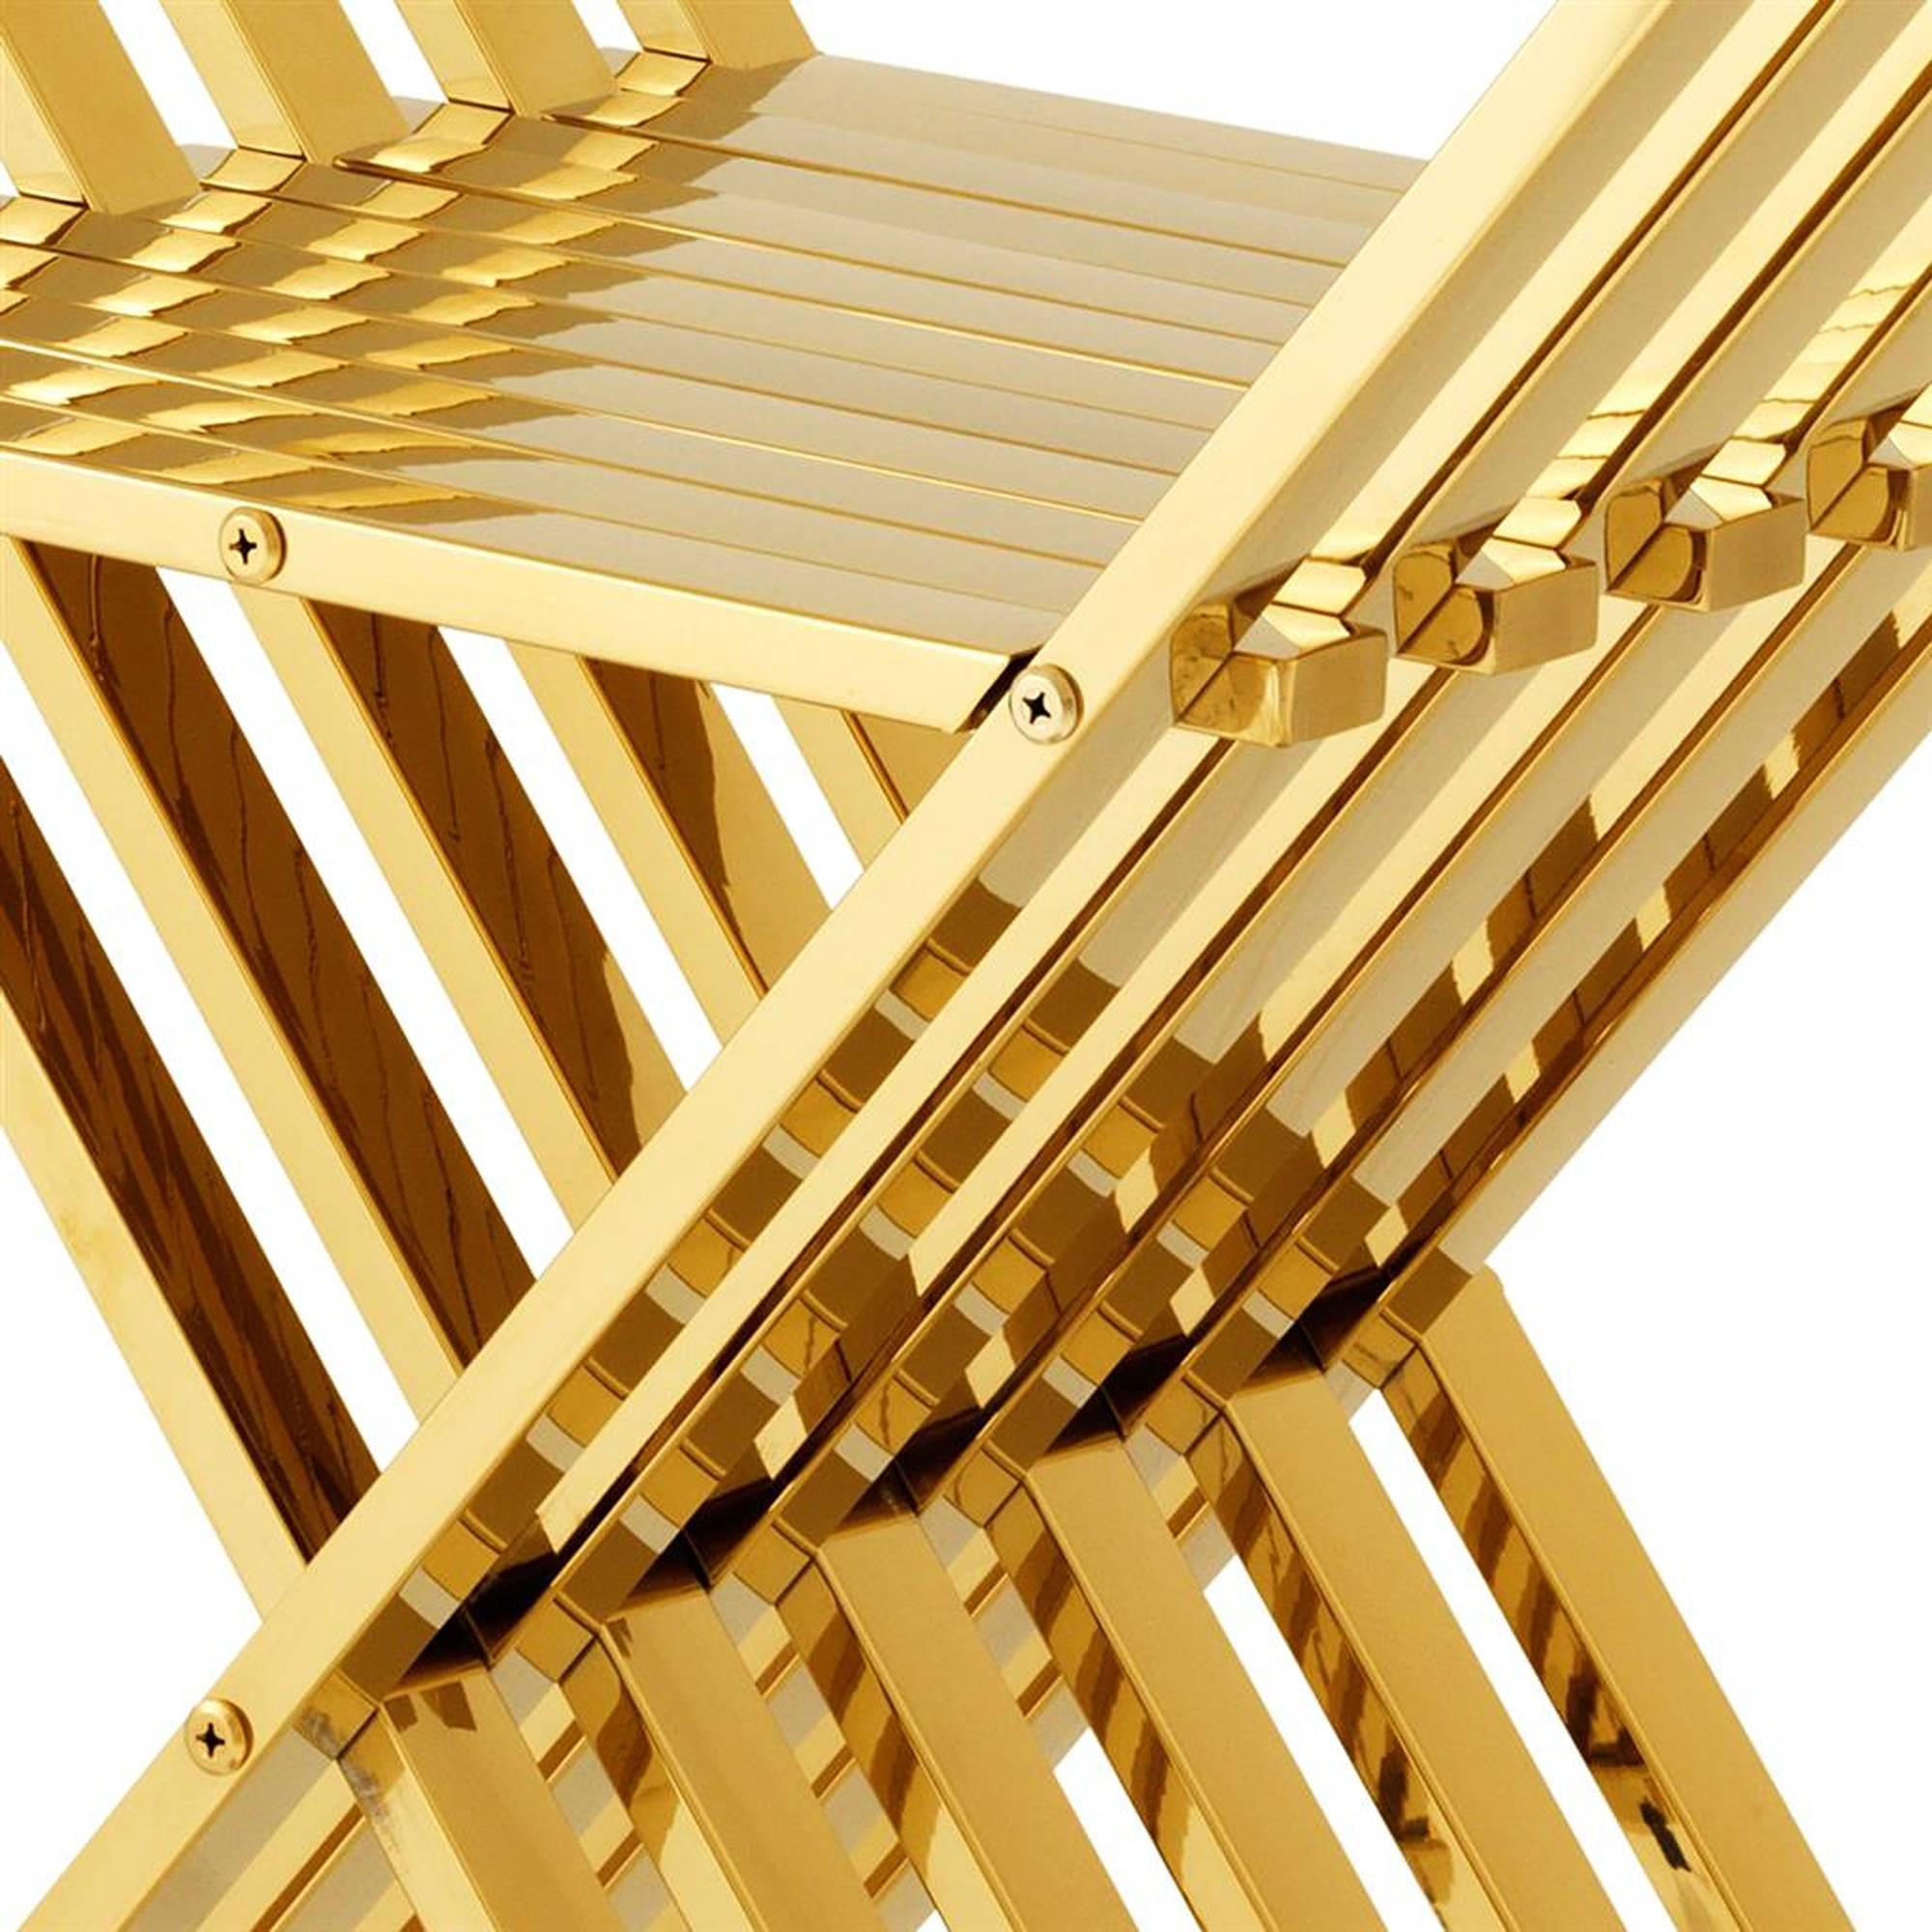 Chair foldable Cesar in gold finish stainless
steel. Available in polished stainless steel.
